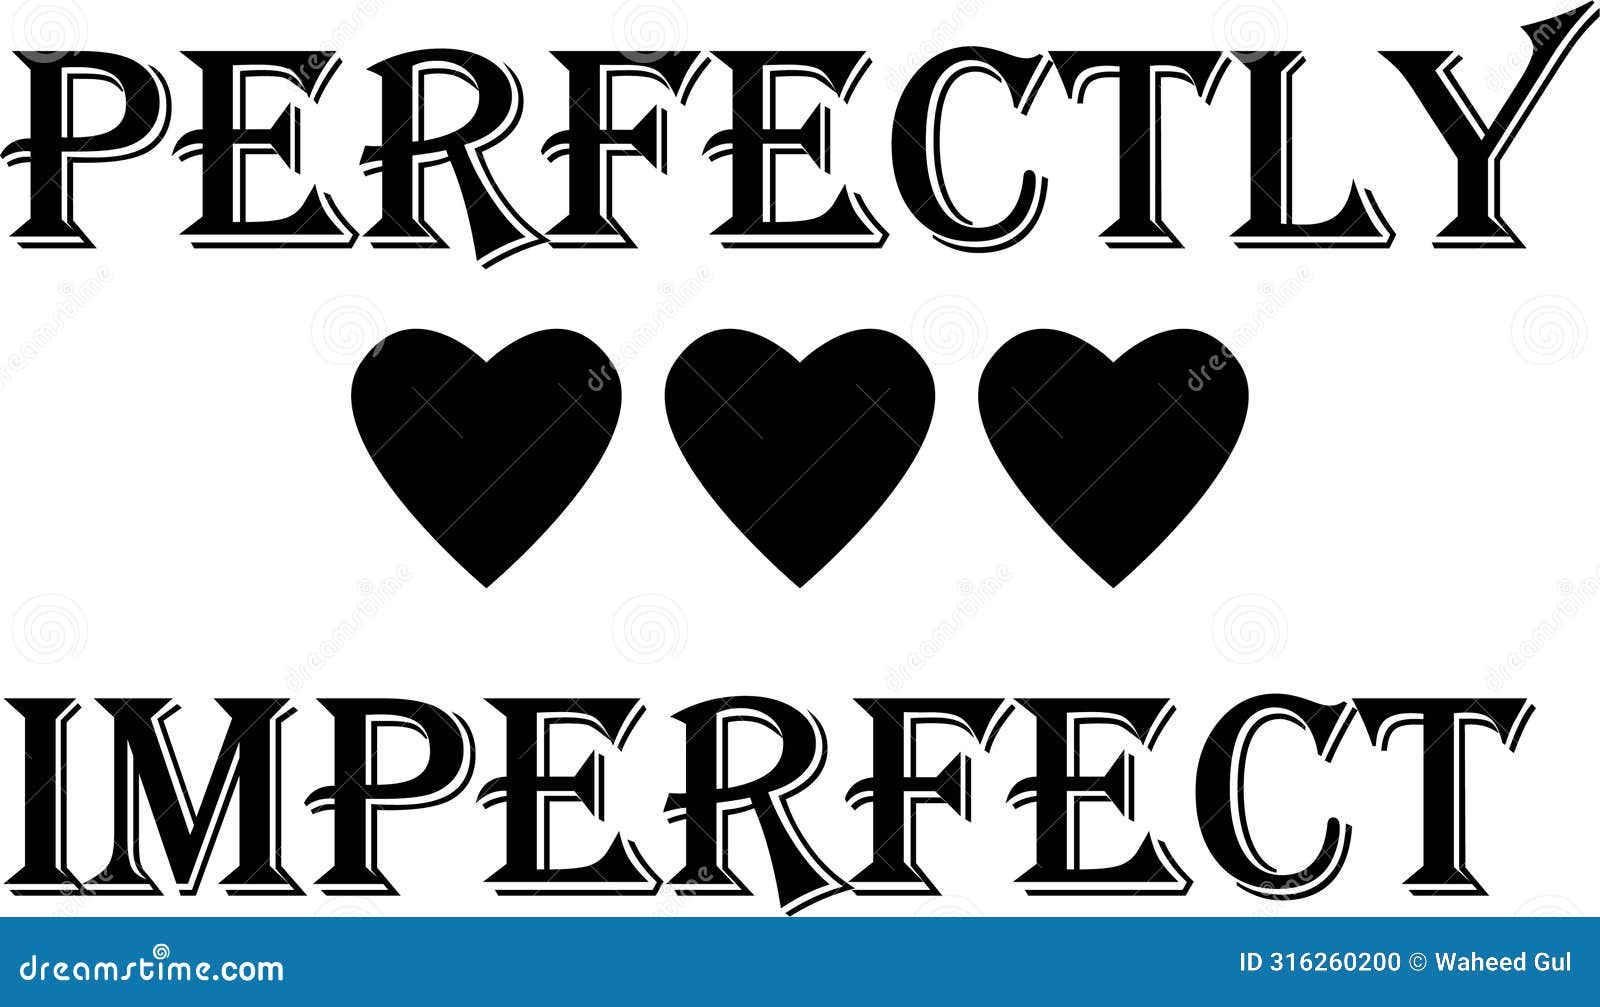 perfectly imperfect jpg image with svg  cut file for cricut and silhouette